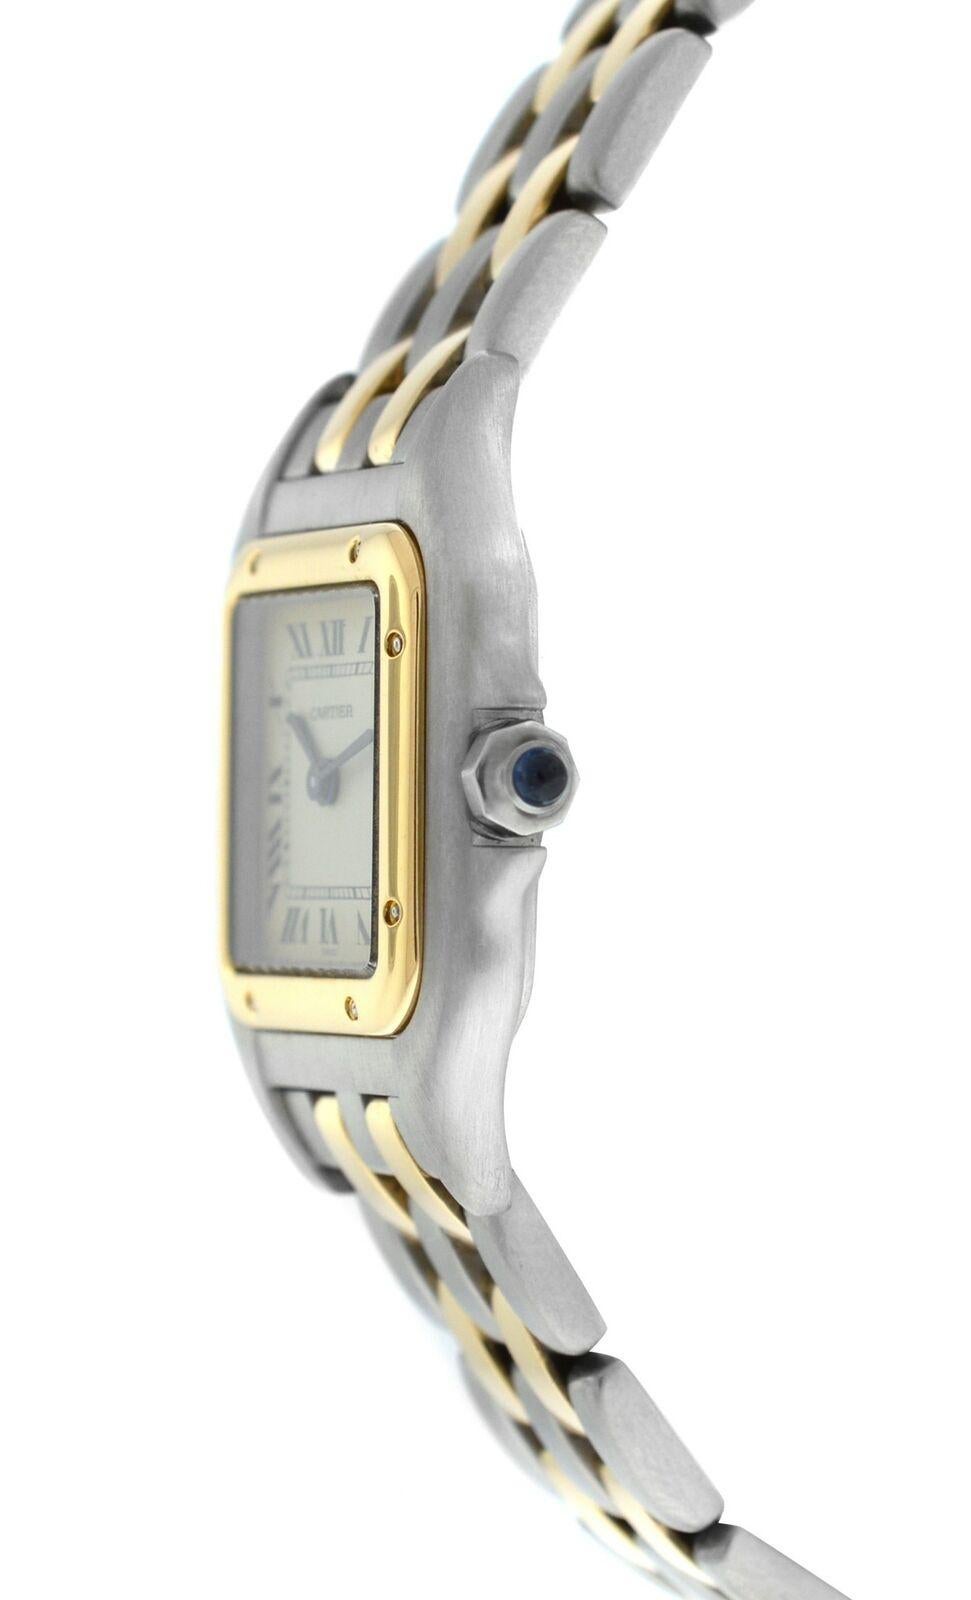 Brand	Cartier
Model	Panthere 112000R
Gender	Ladies
Condition	Pre-owned
Movement	Swiss Quartz
Case Material	Stainless Steel & 18K Yellow Gold
Bracelet / Strap Material	
Stainless Steel  & 18K Yellow Gold

Clasp / Buckle Material	
Stainless Steel